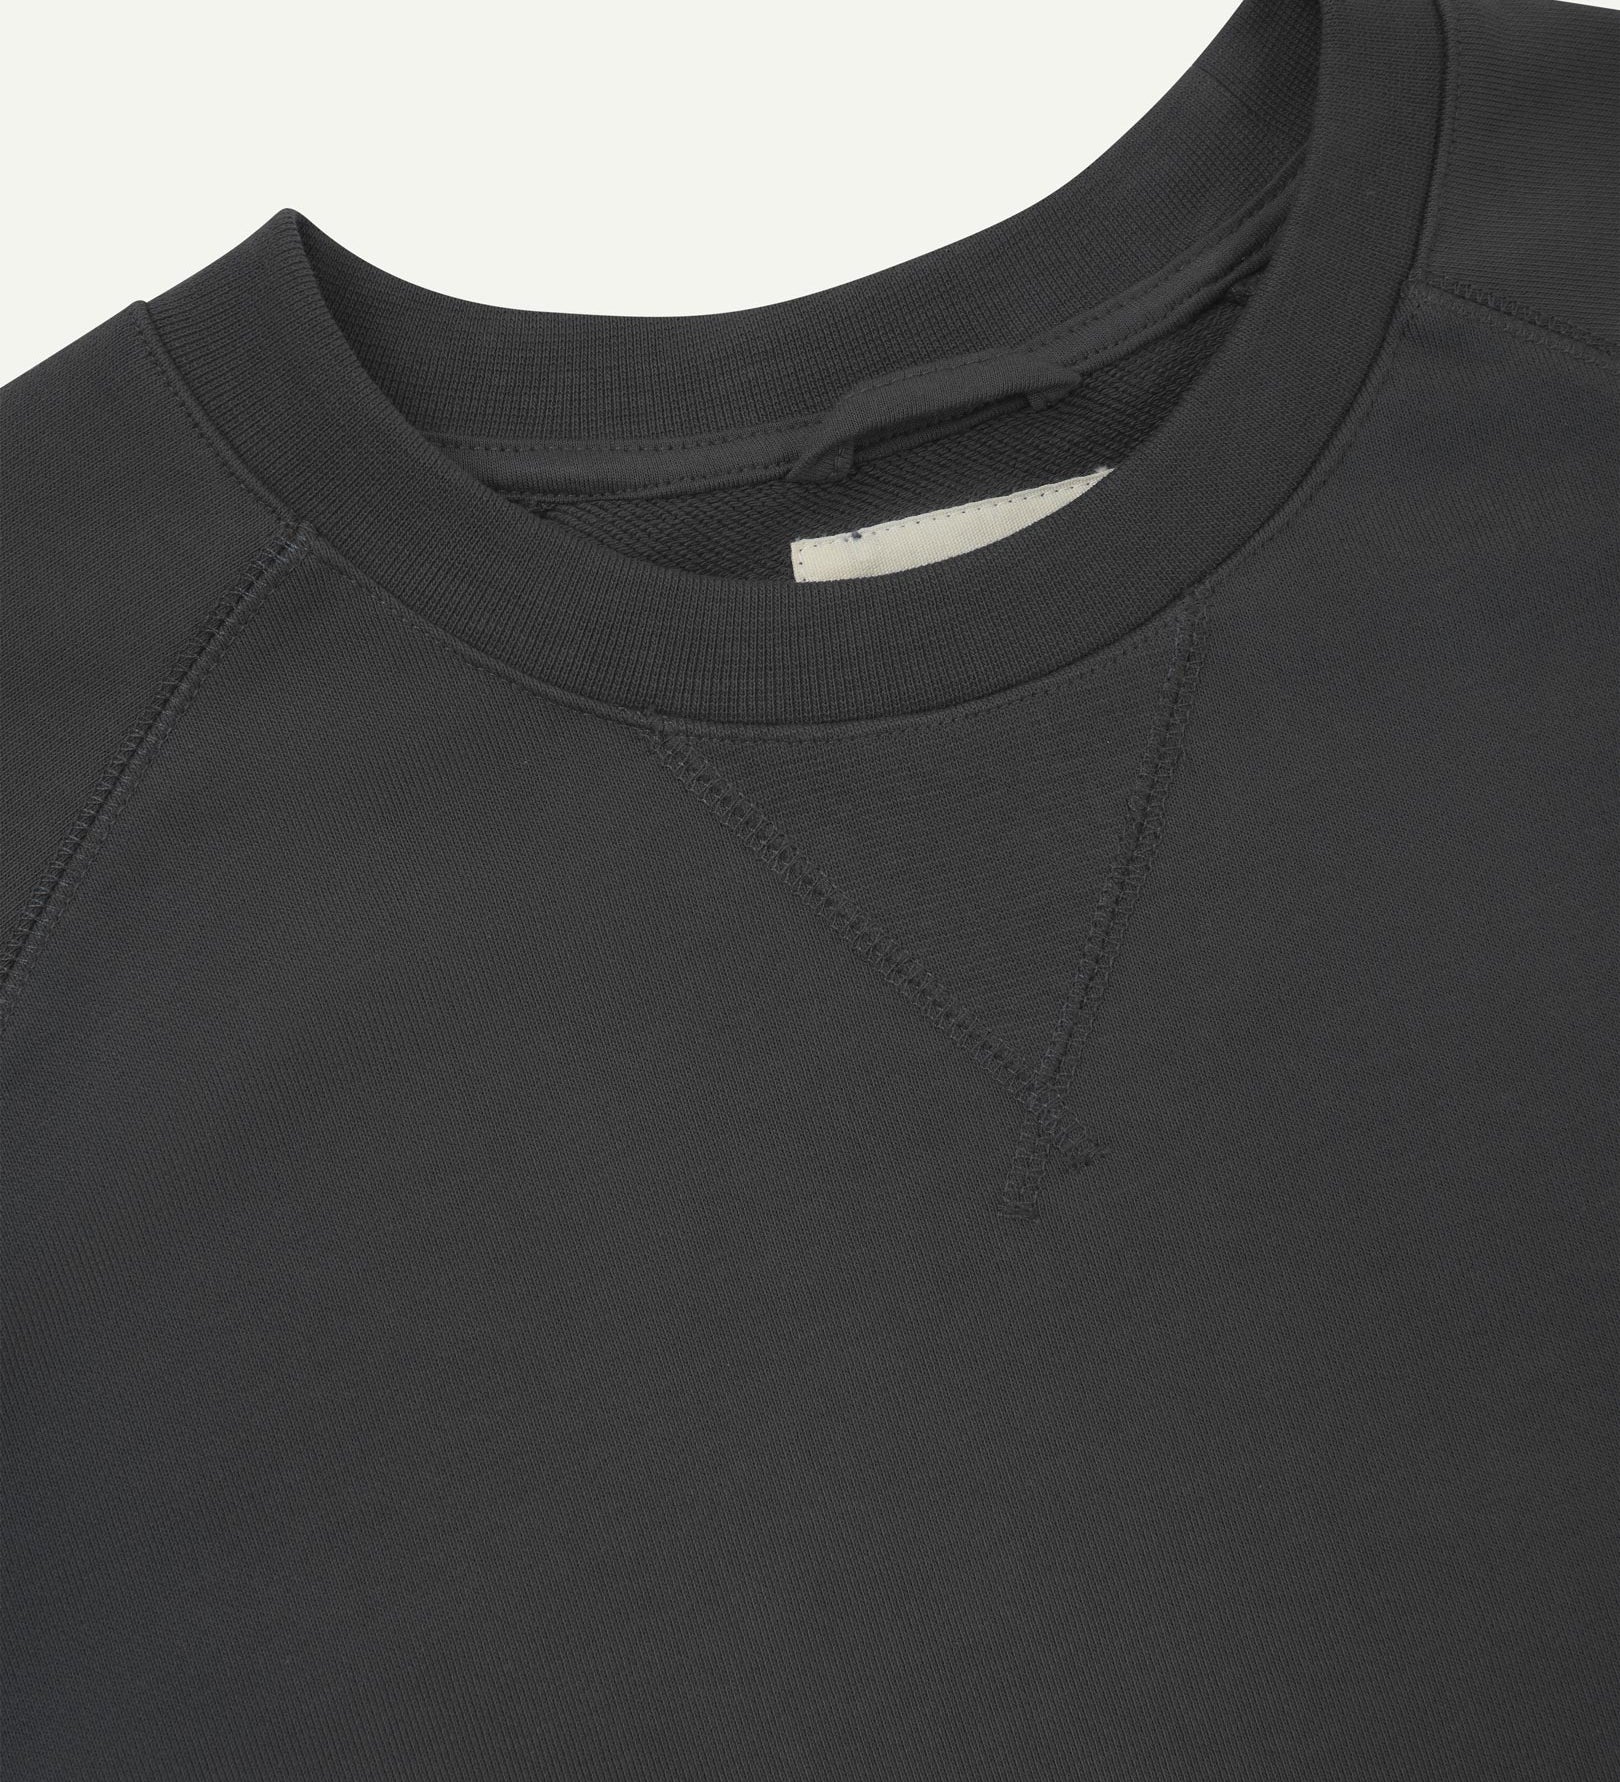 Close-up view of crew neck collar with decorative v-insert on Uskees faded black heavyweight cotton jersey sweatshirt.